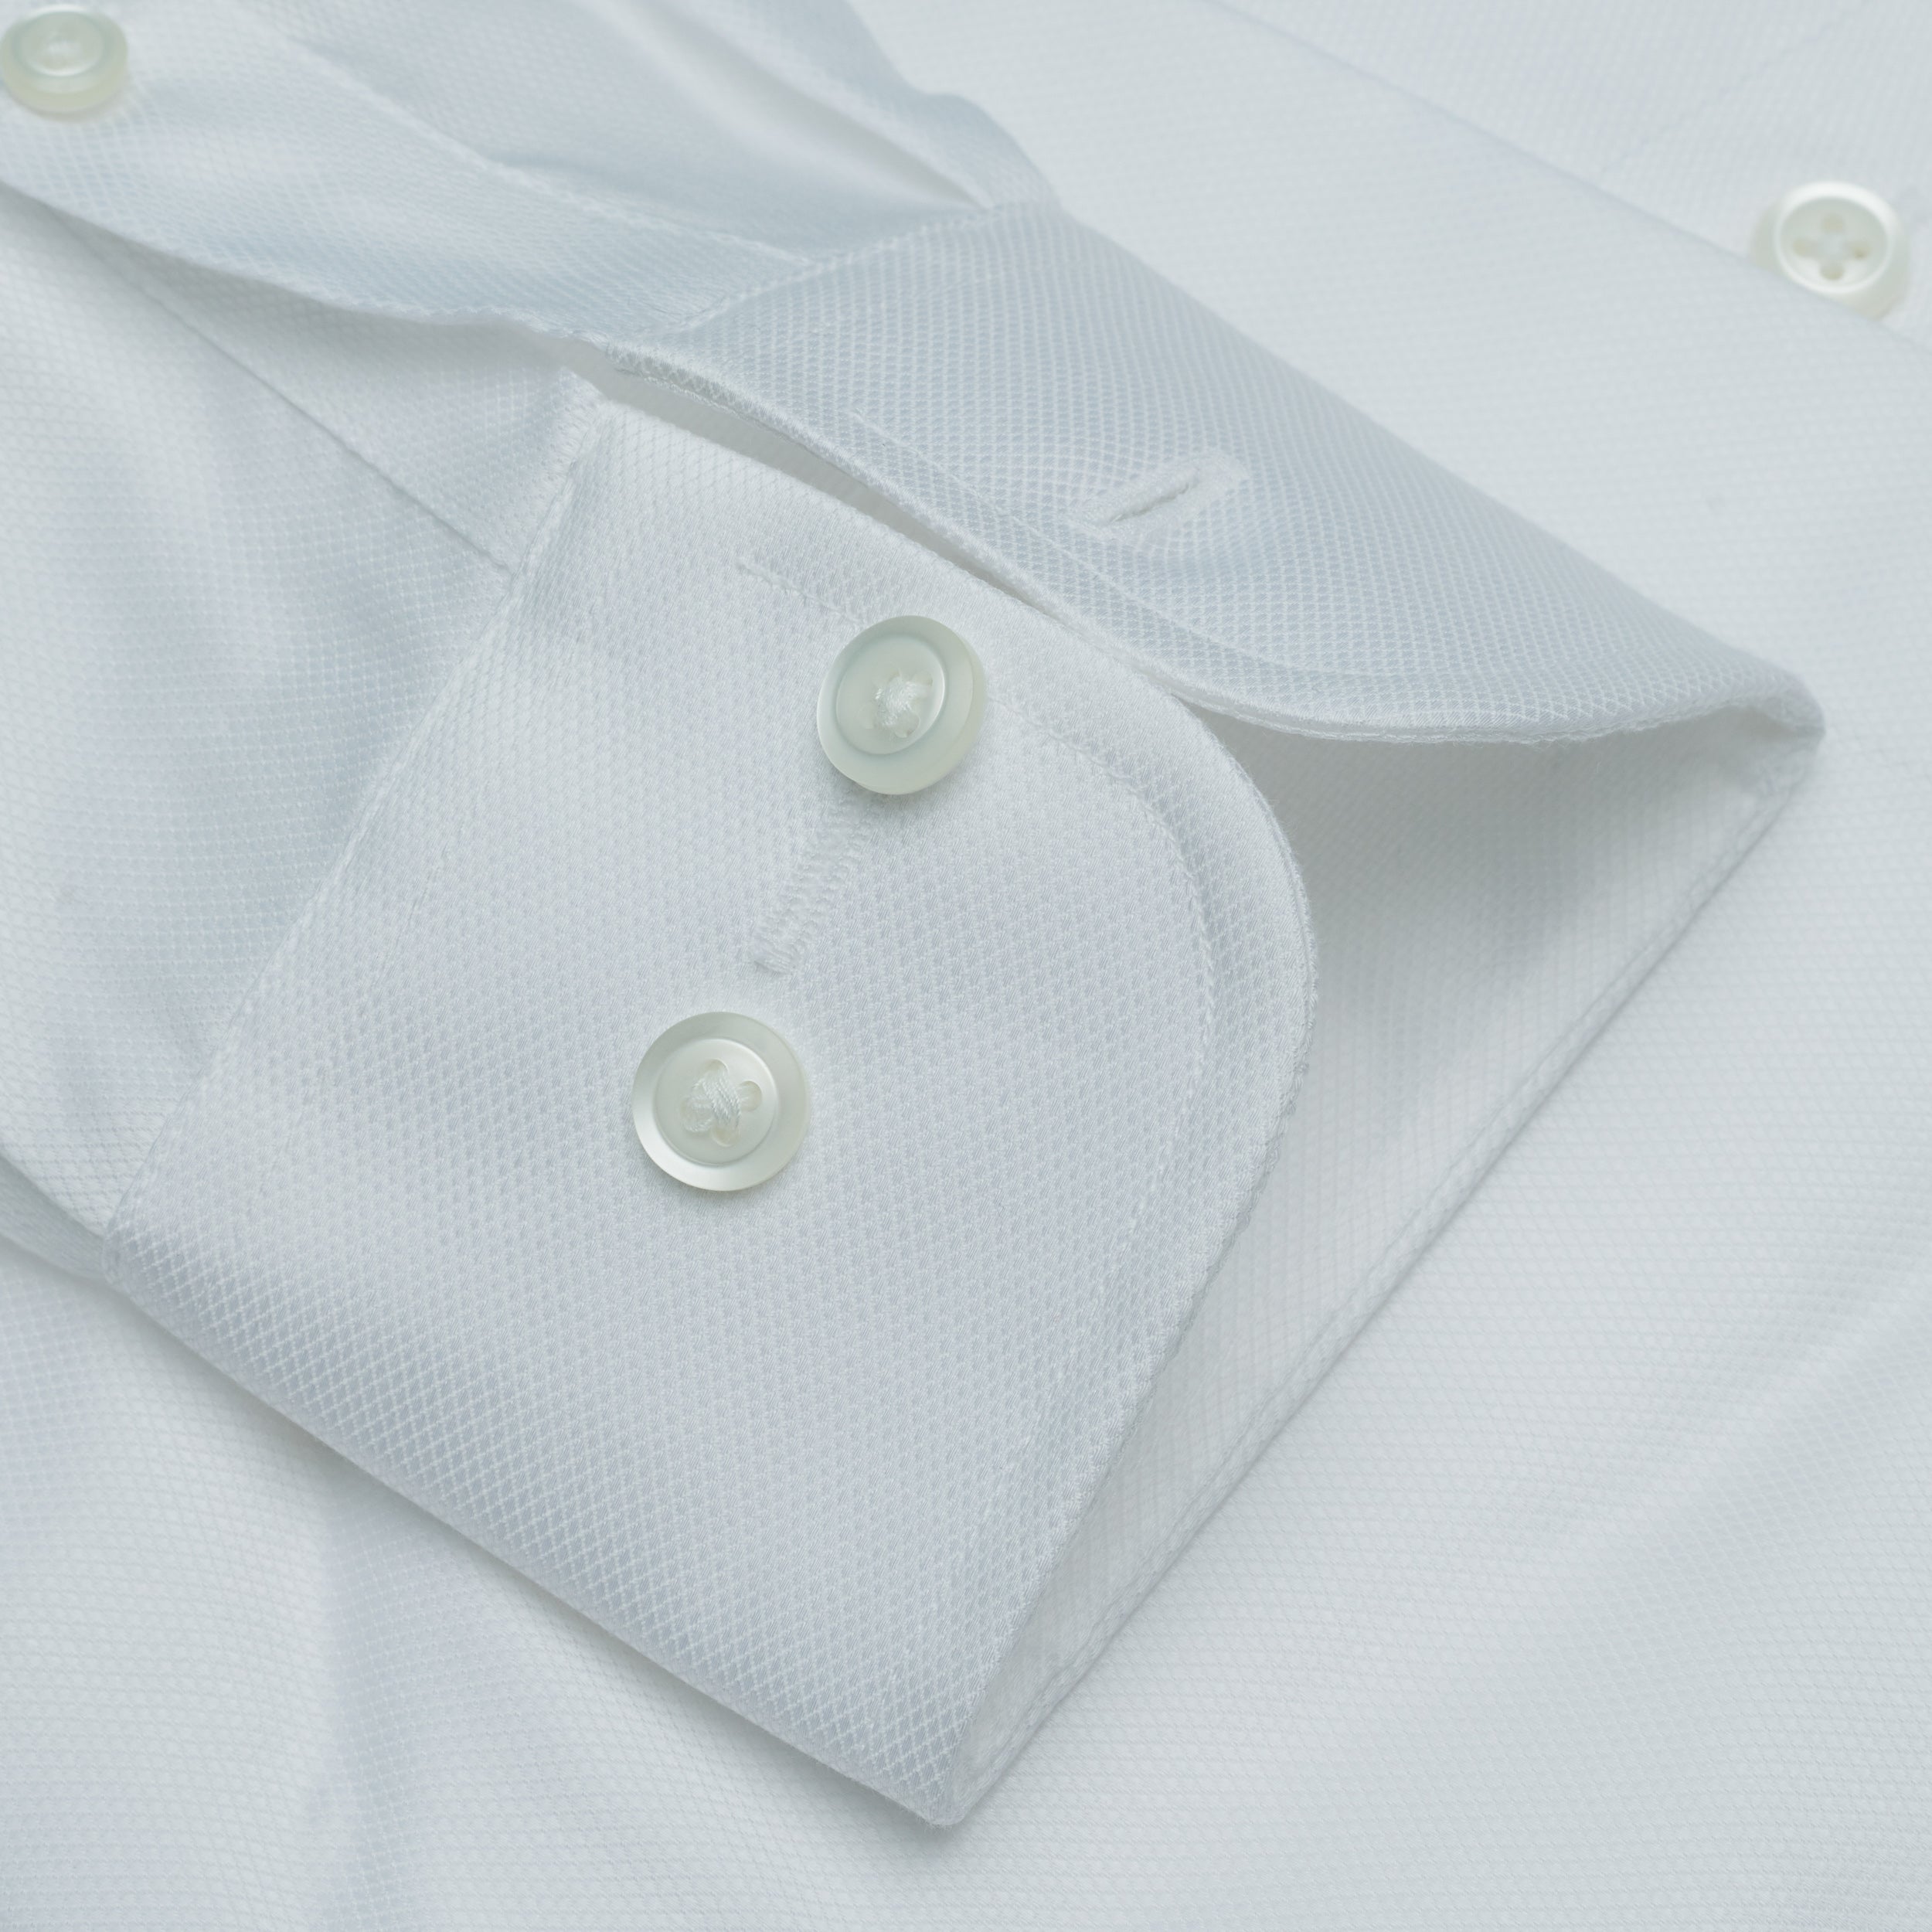 005 TF SC - White Royal Oxford Tailored Fit Spread Collar